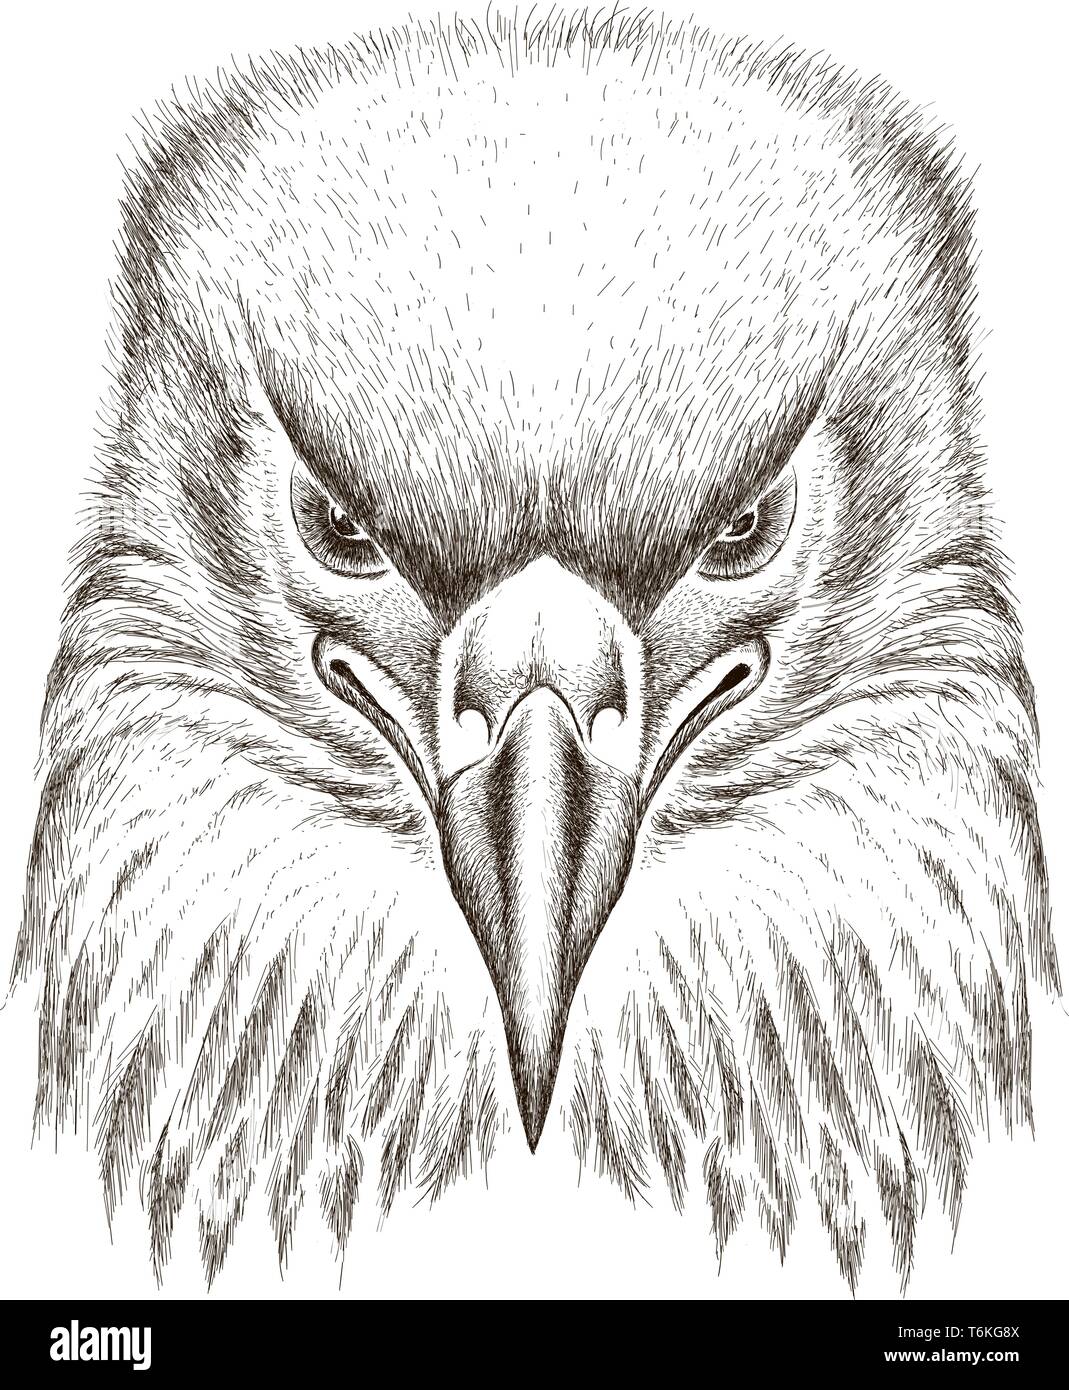 How to draw an eagle head with a pencil stepbystep drawing tutorial